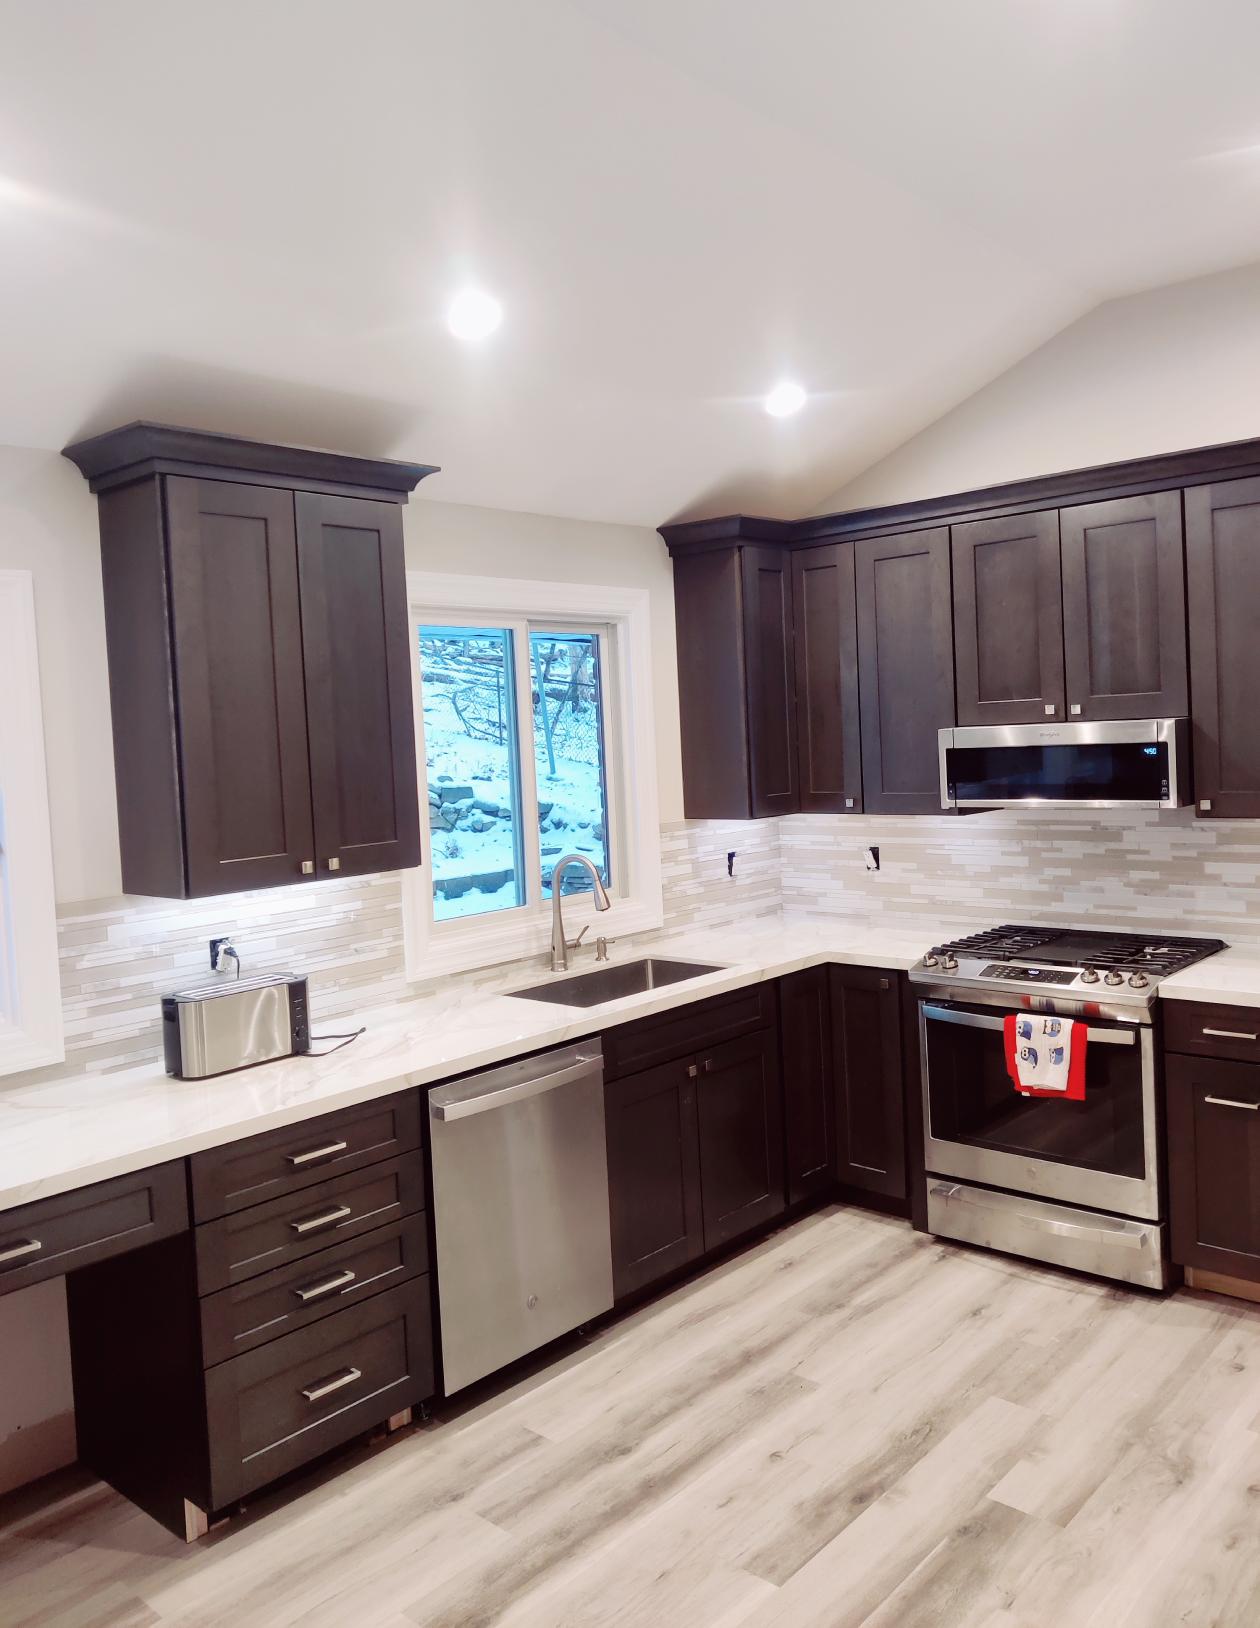 A sophisticated kitchen remodel boasting dark wooden cabinets and stainless steel appliances, completed by True Built Construction. The elegant design is highlighted by white marble countertops and a linear tile backsplash, creating a luxurious and functional cooking space